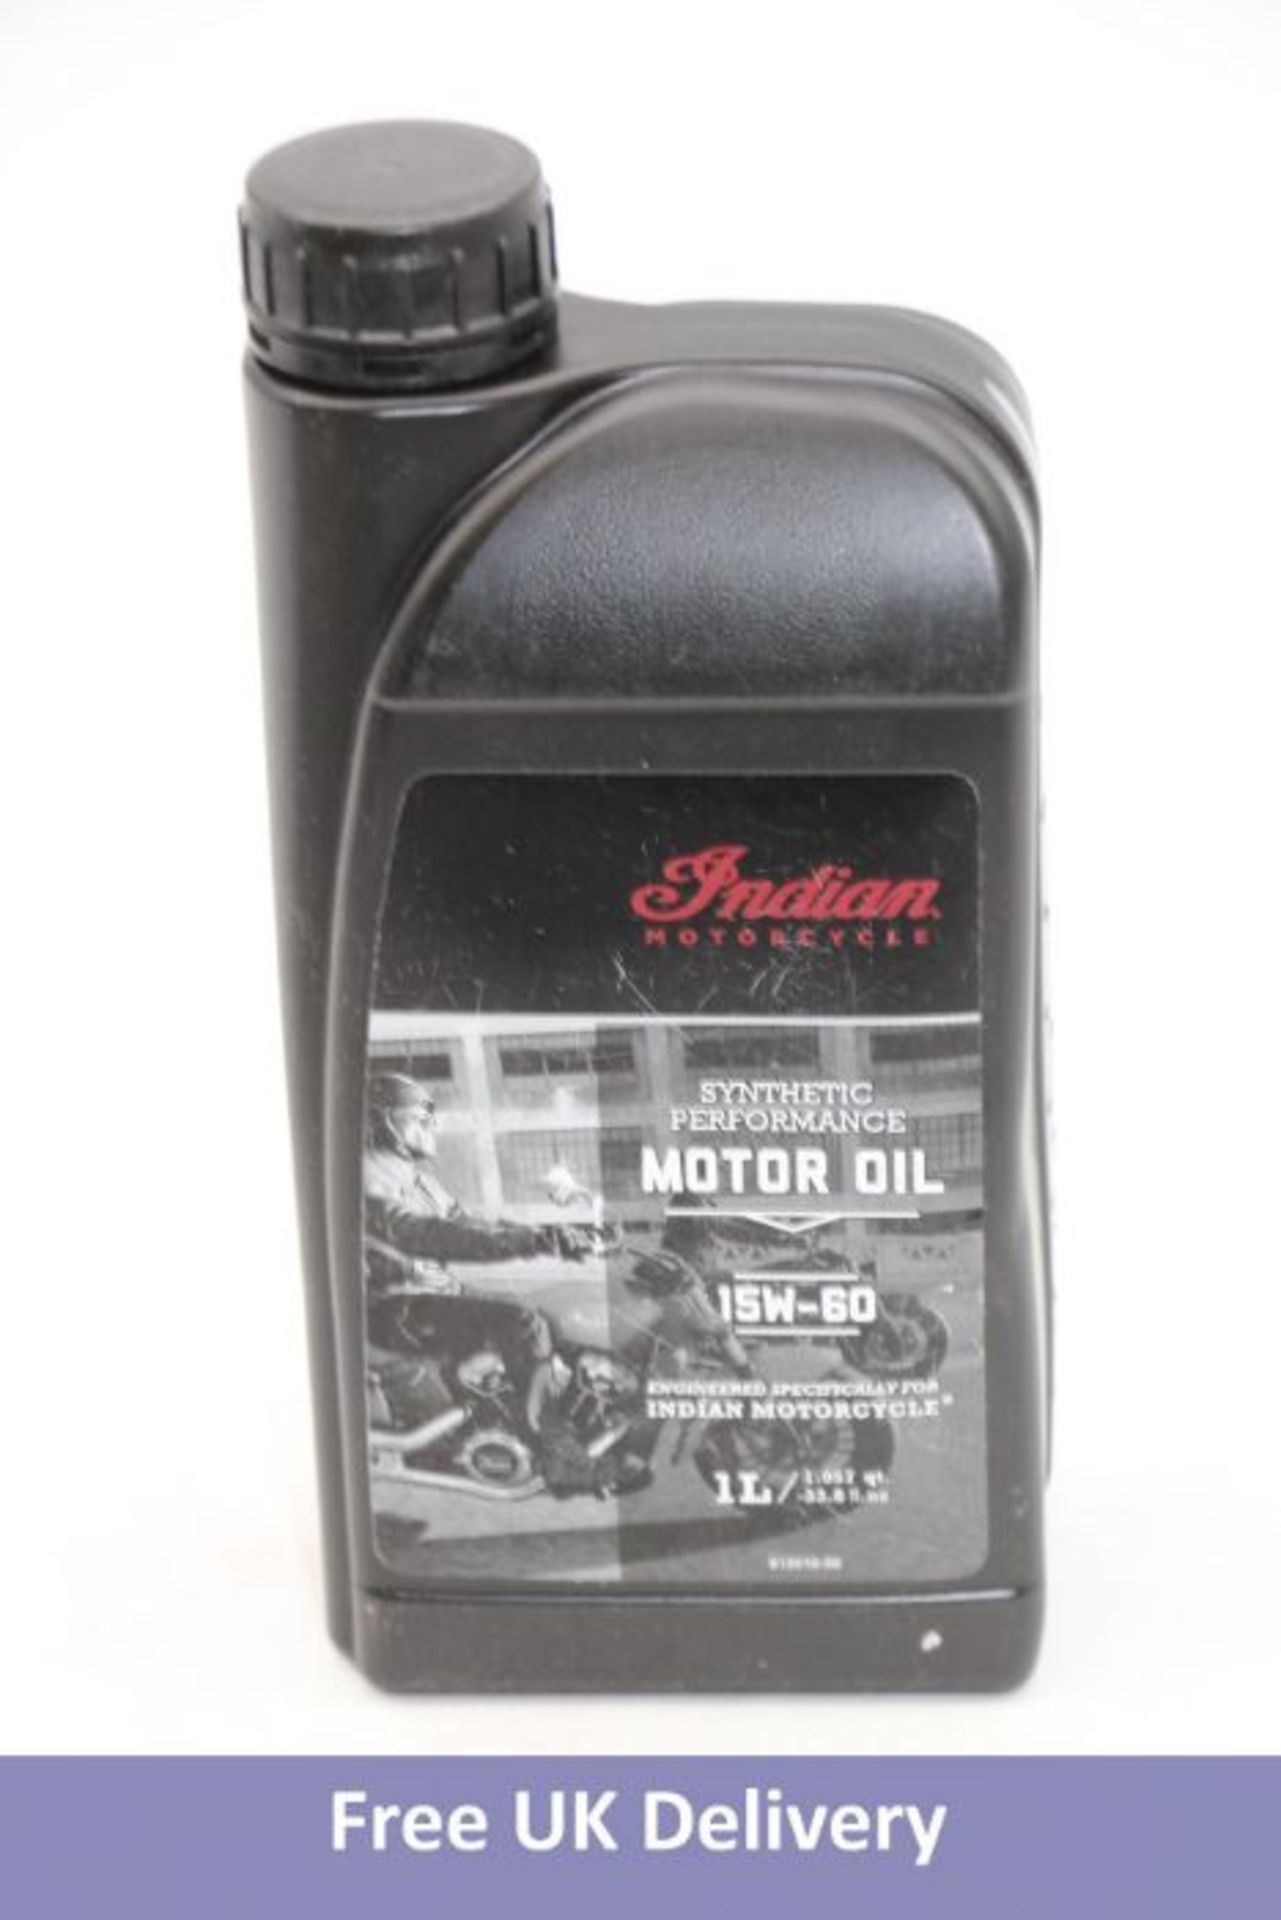 Six 1-Litre Bottles of Indian Motorcycle Synthetic Performance Motor Oil, 15W-60